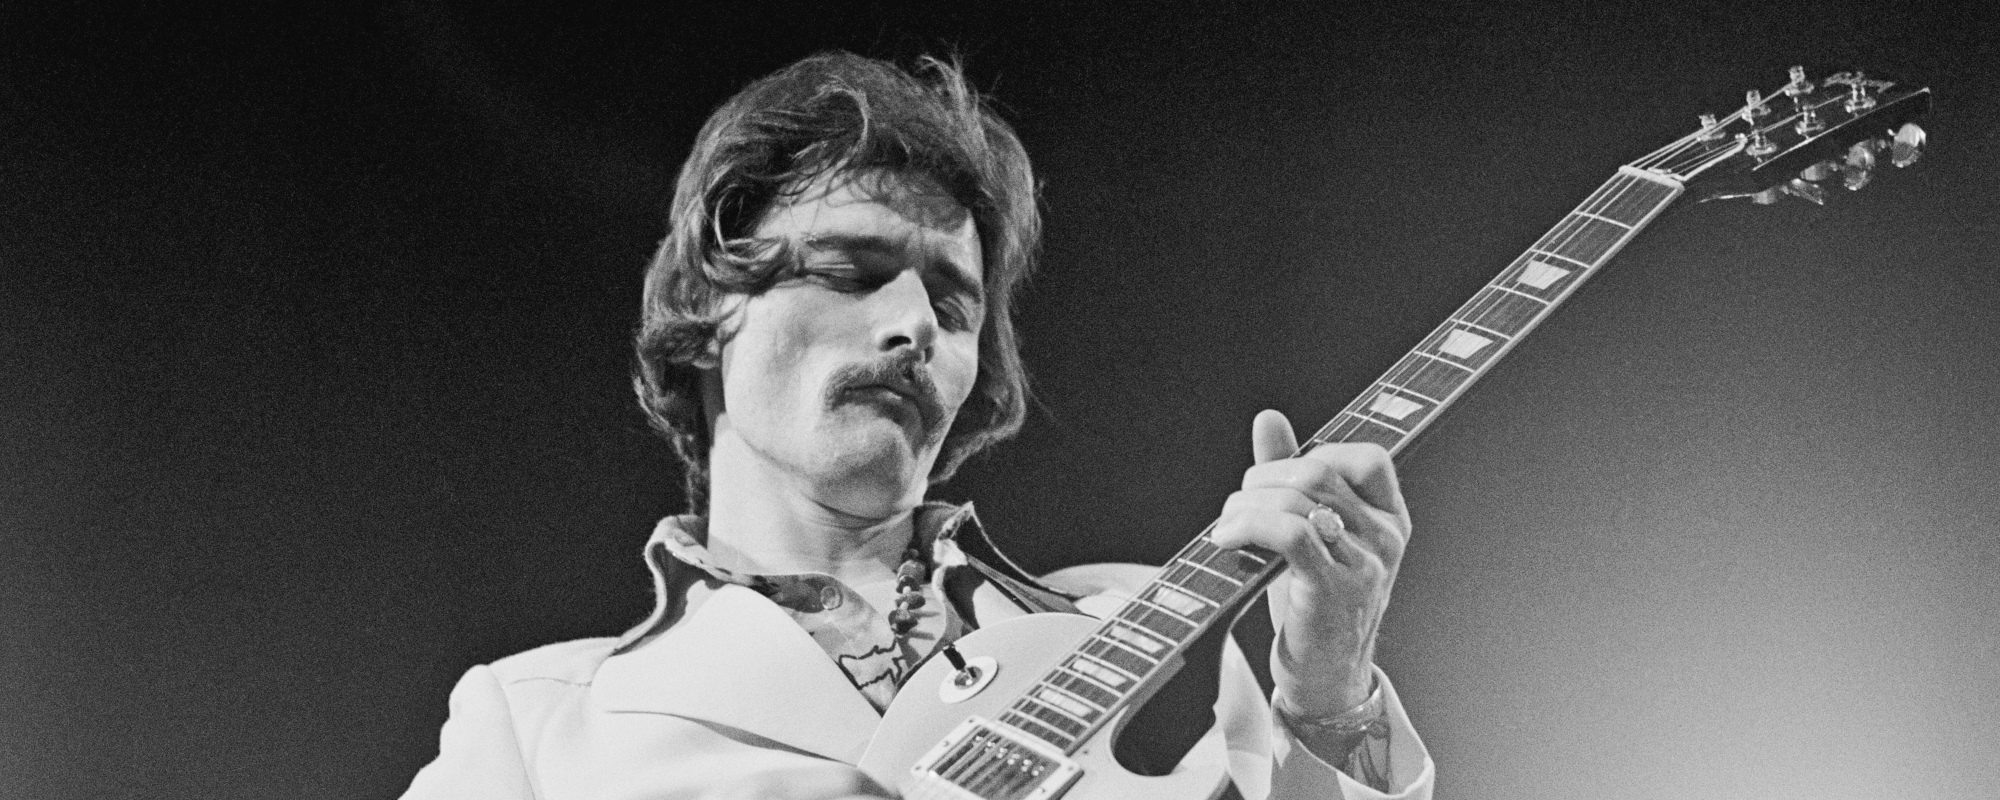 5 Must-Hear Songs from Dickey Betts’ Solo Career